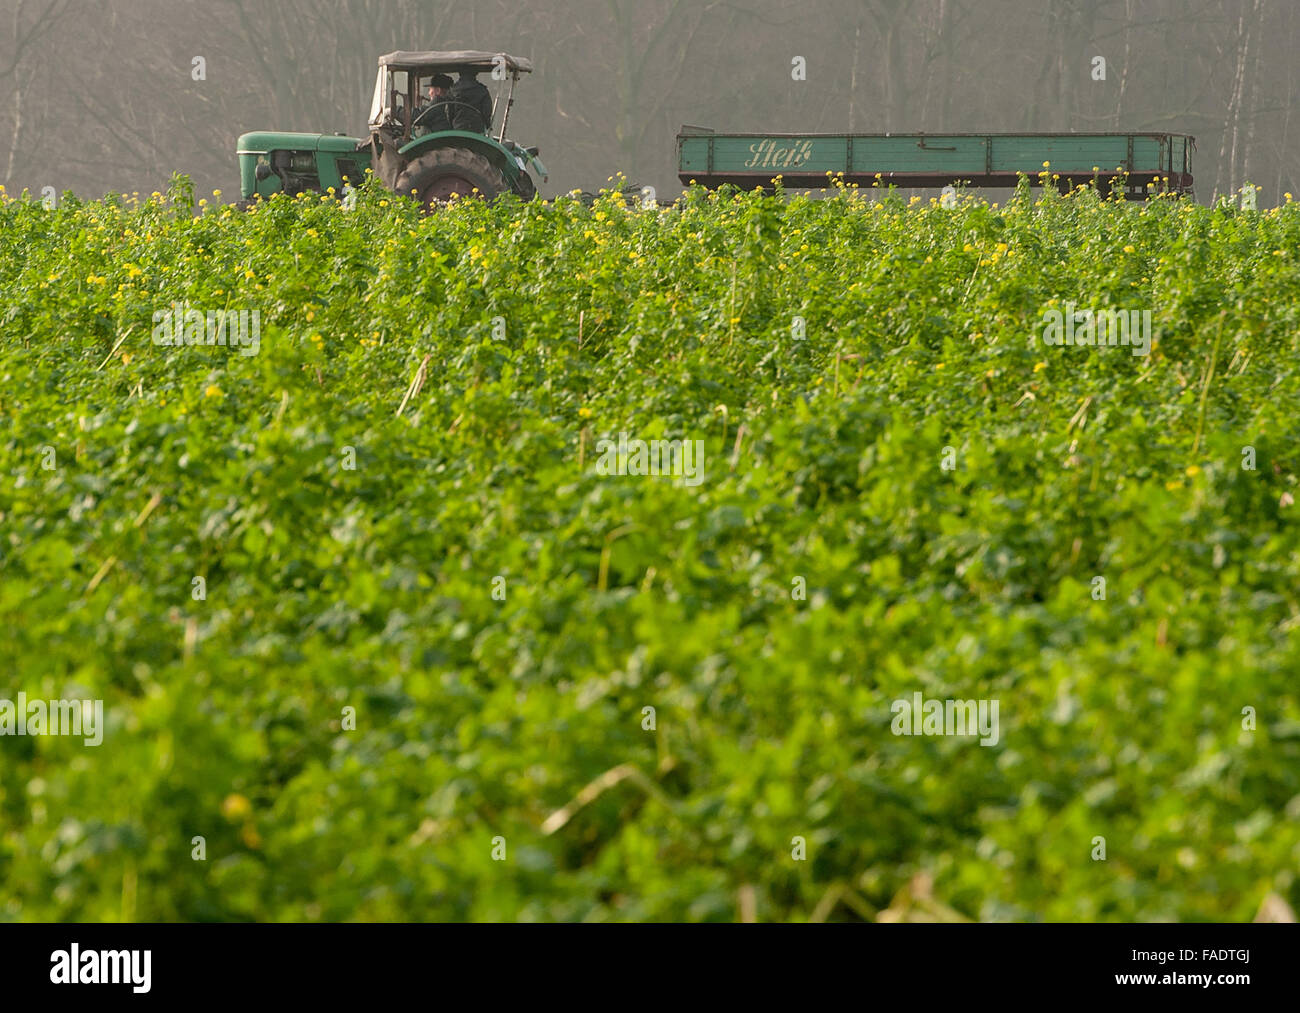 Bruchhausen-Vilsen, Germany. 28th Dec, 2015. A farmer drives his tractor beside a green field of sugar beet, near Bruchhausen-Vilsen, Germany, 28 December 2015. Mustard plants flower among the sugar beet. PHOTO: INGO WAGNER/DPA/Alamy Live News Stock Photo